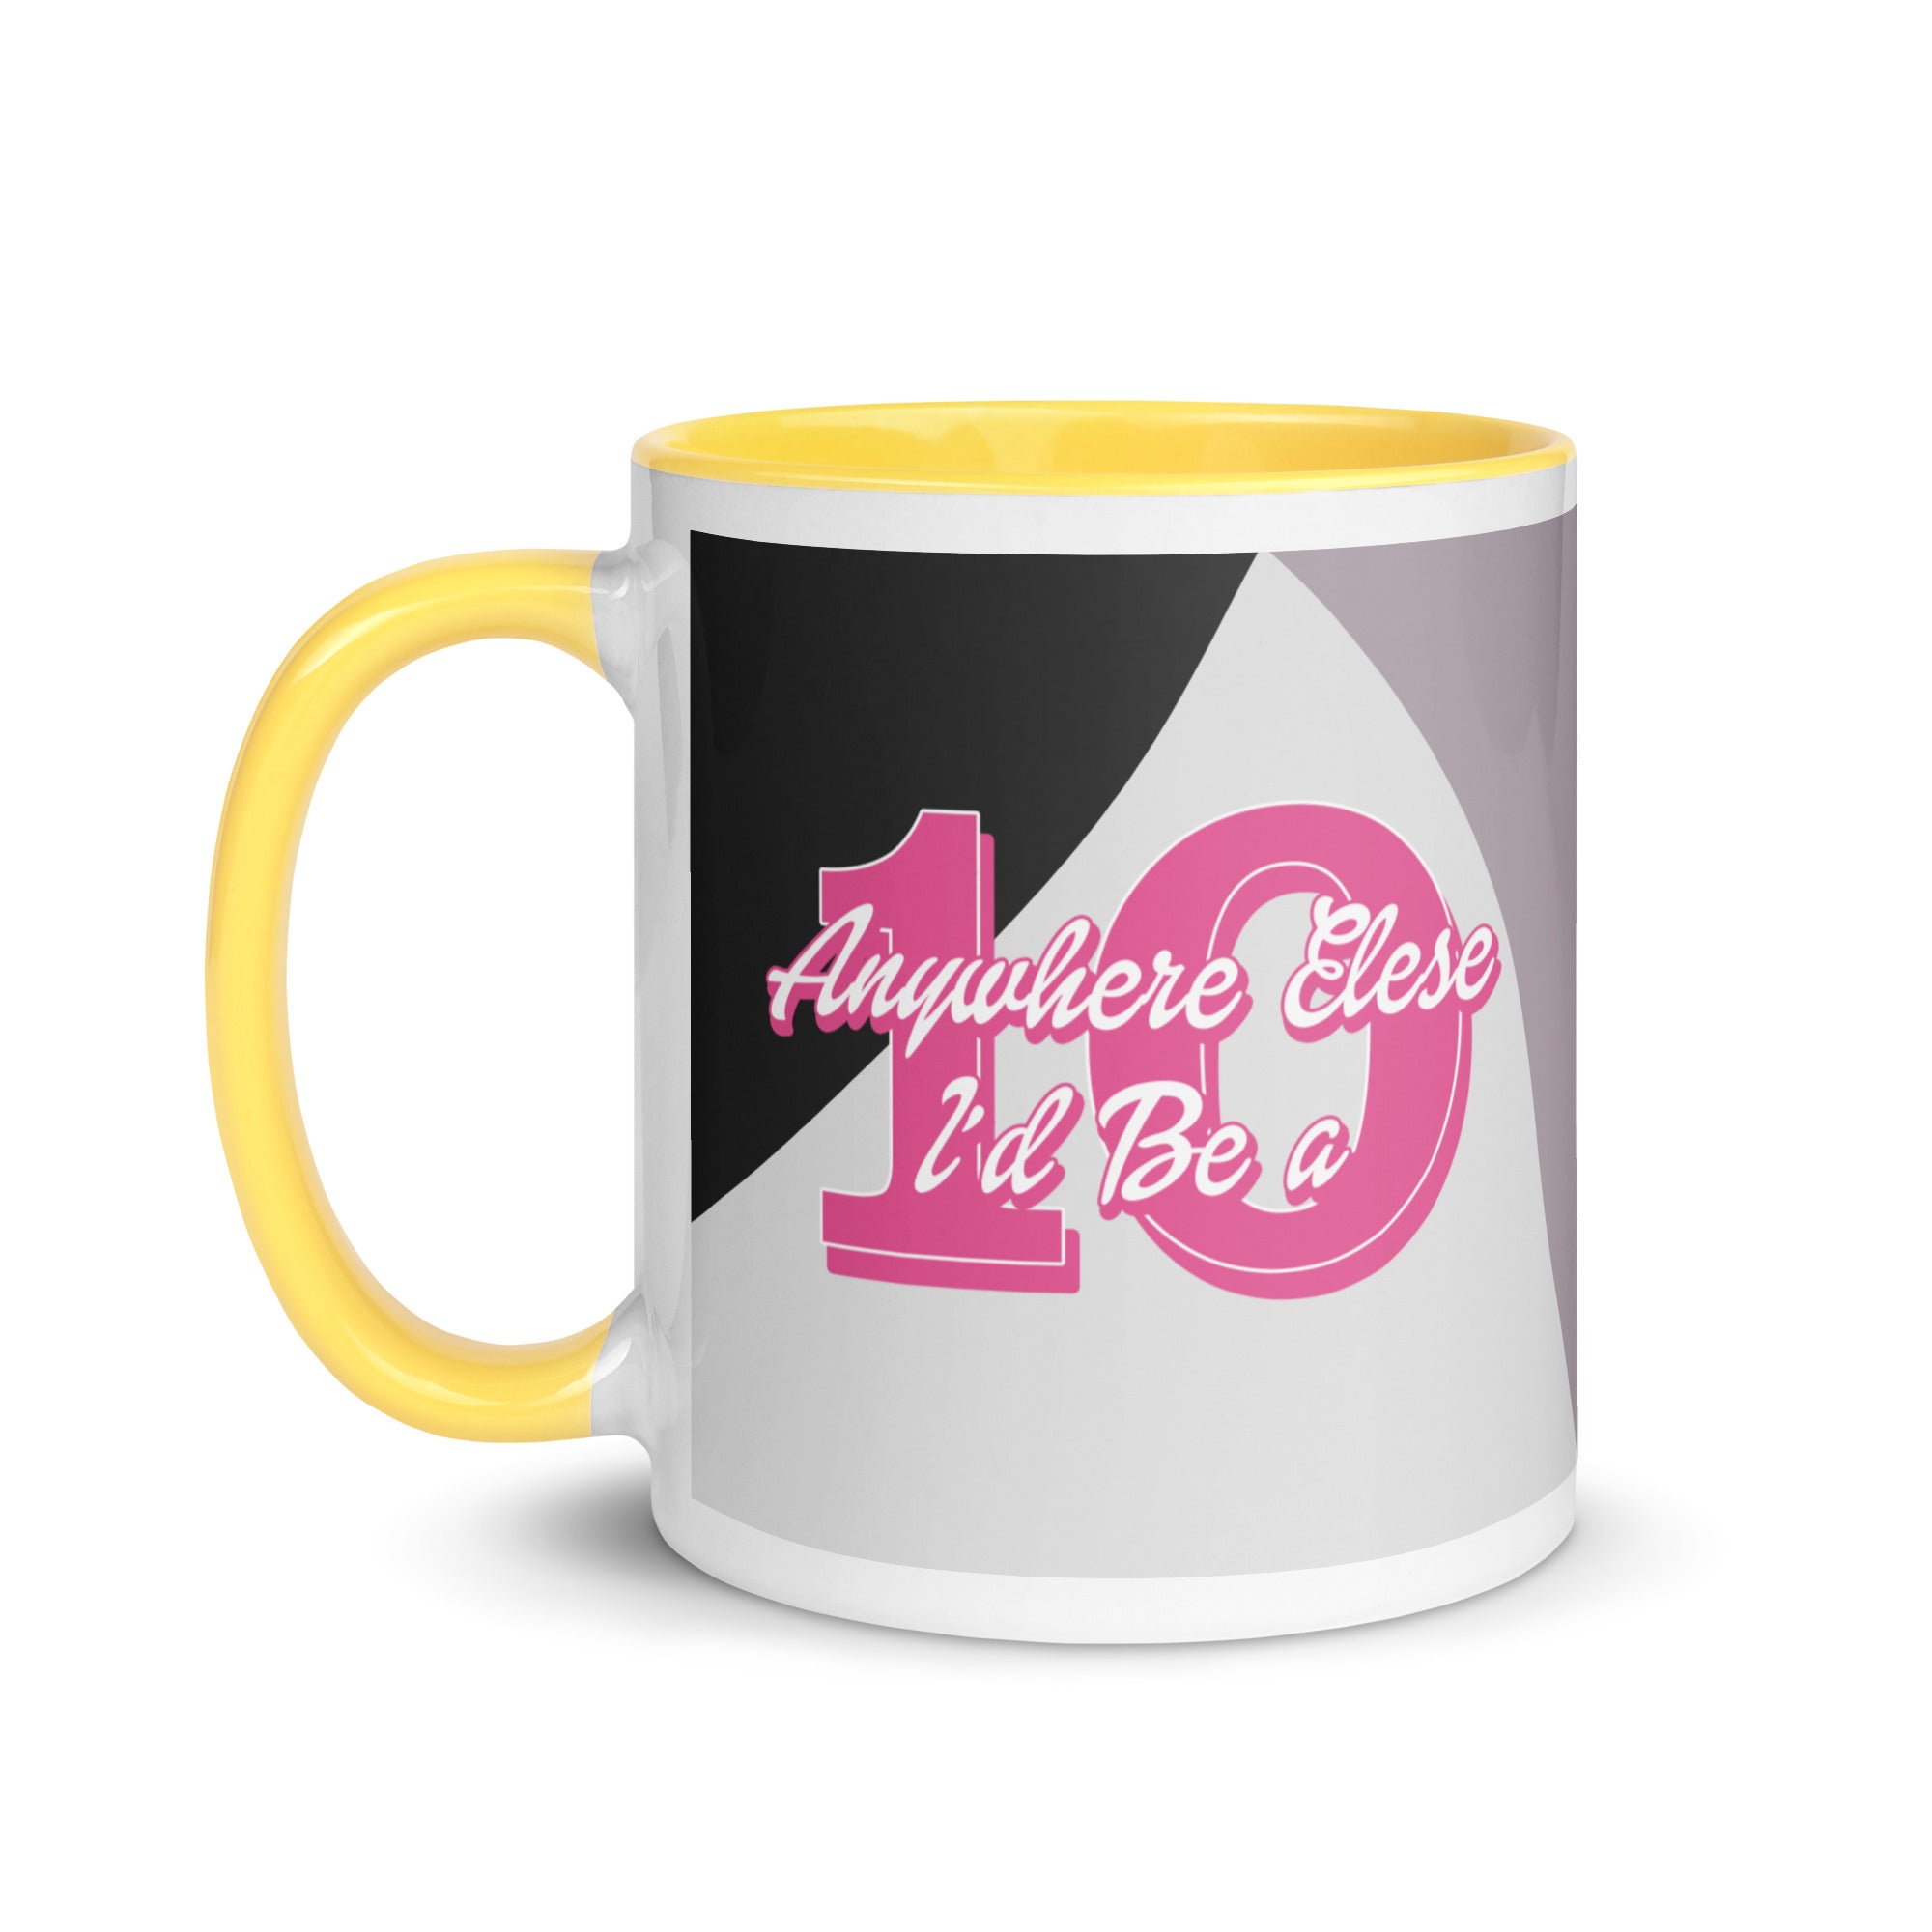 a black and white coffee mug with pink lettering